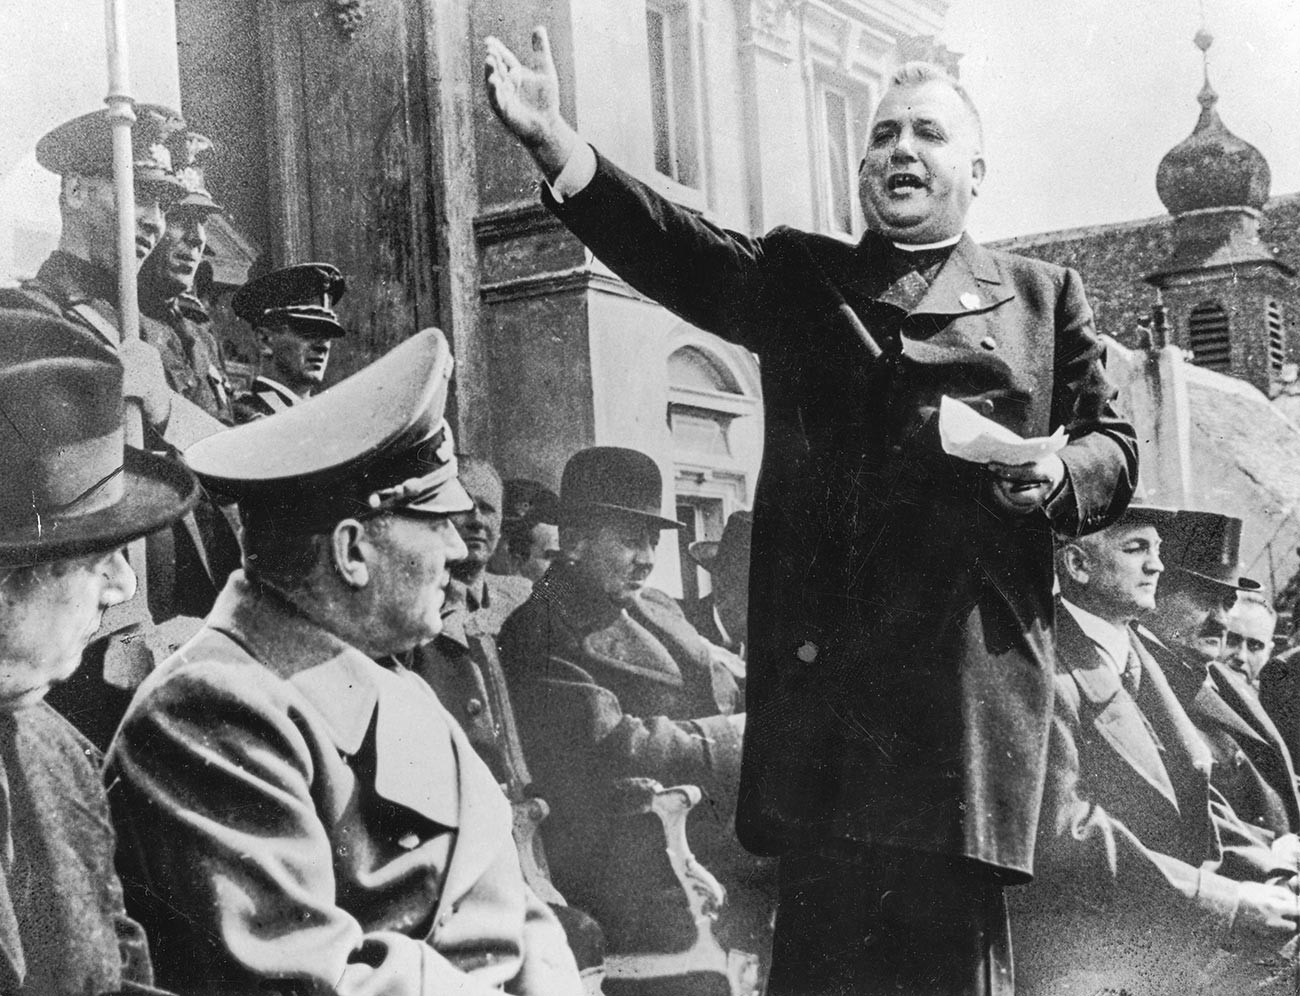 Slovak priest and political leader Jozef Tiso welcomes the Nazis to Slovakia, 1939.